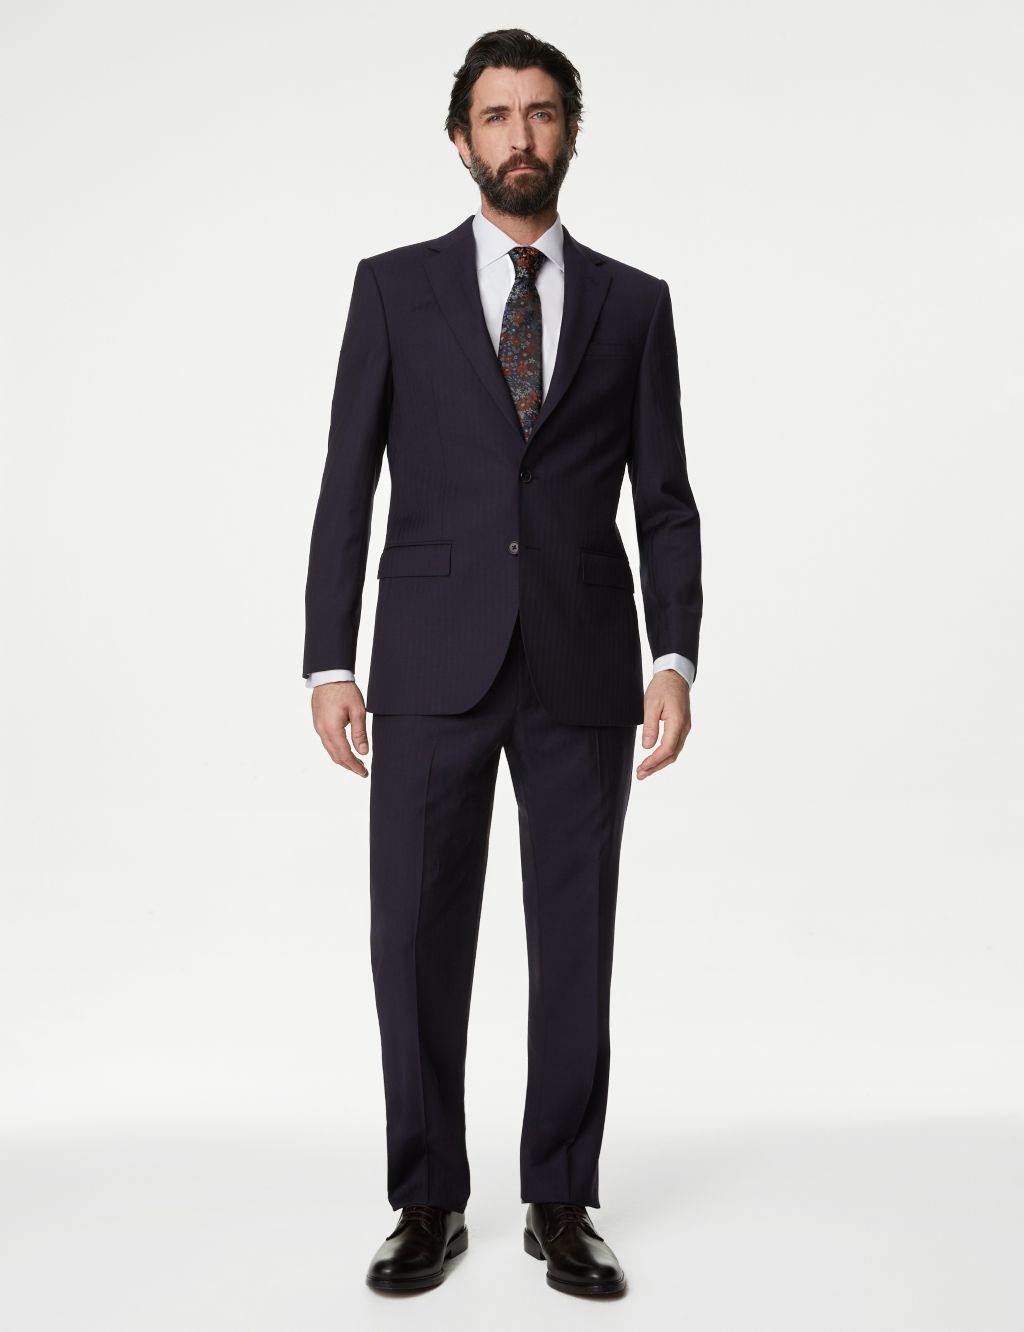 How Many Business Suits Should You Own? - sartorialbay